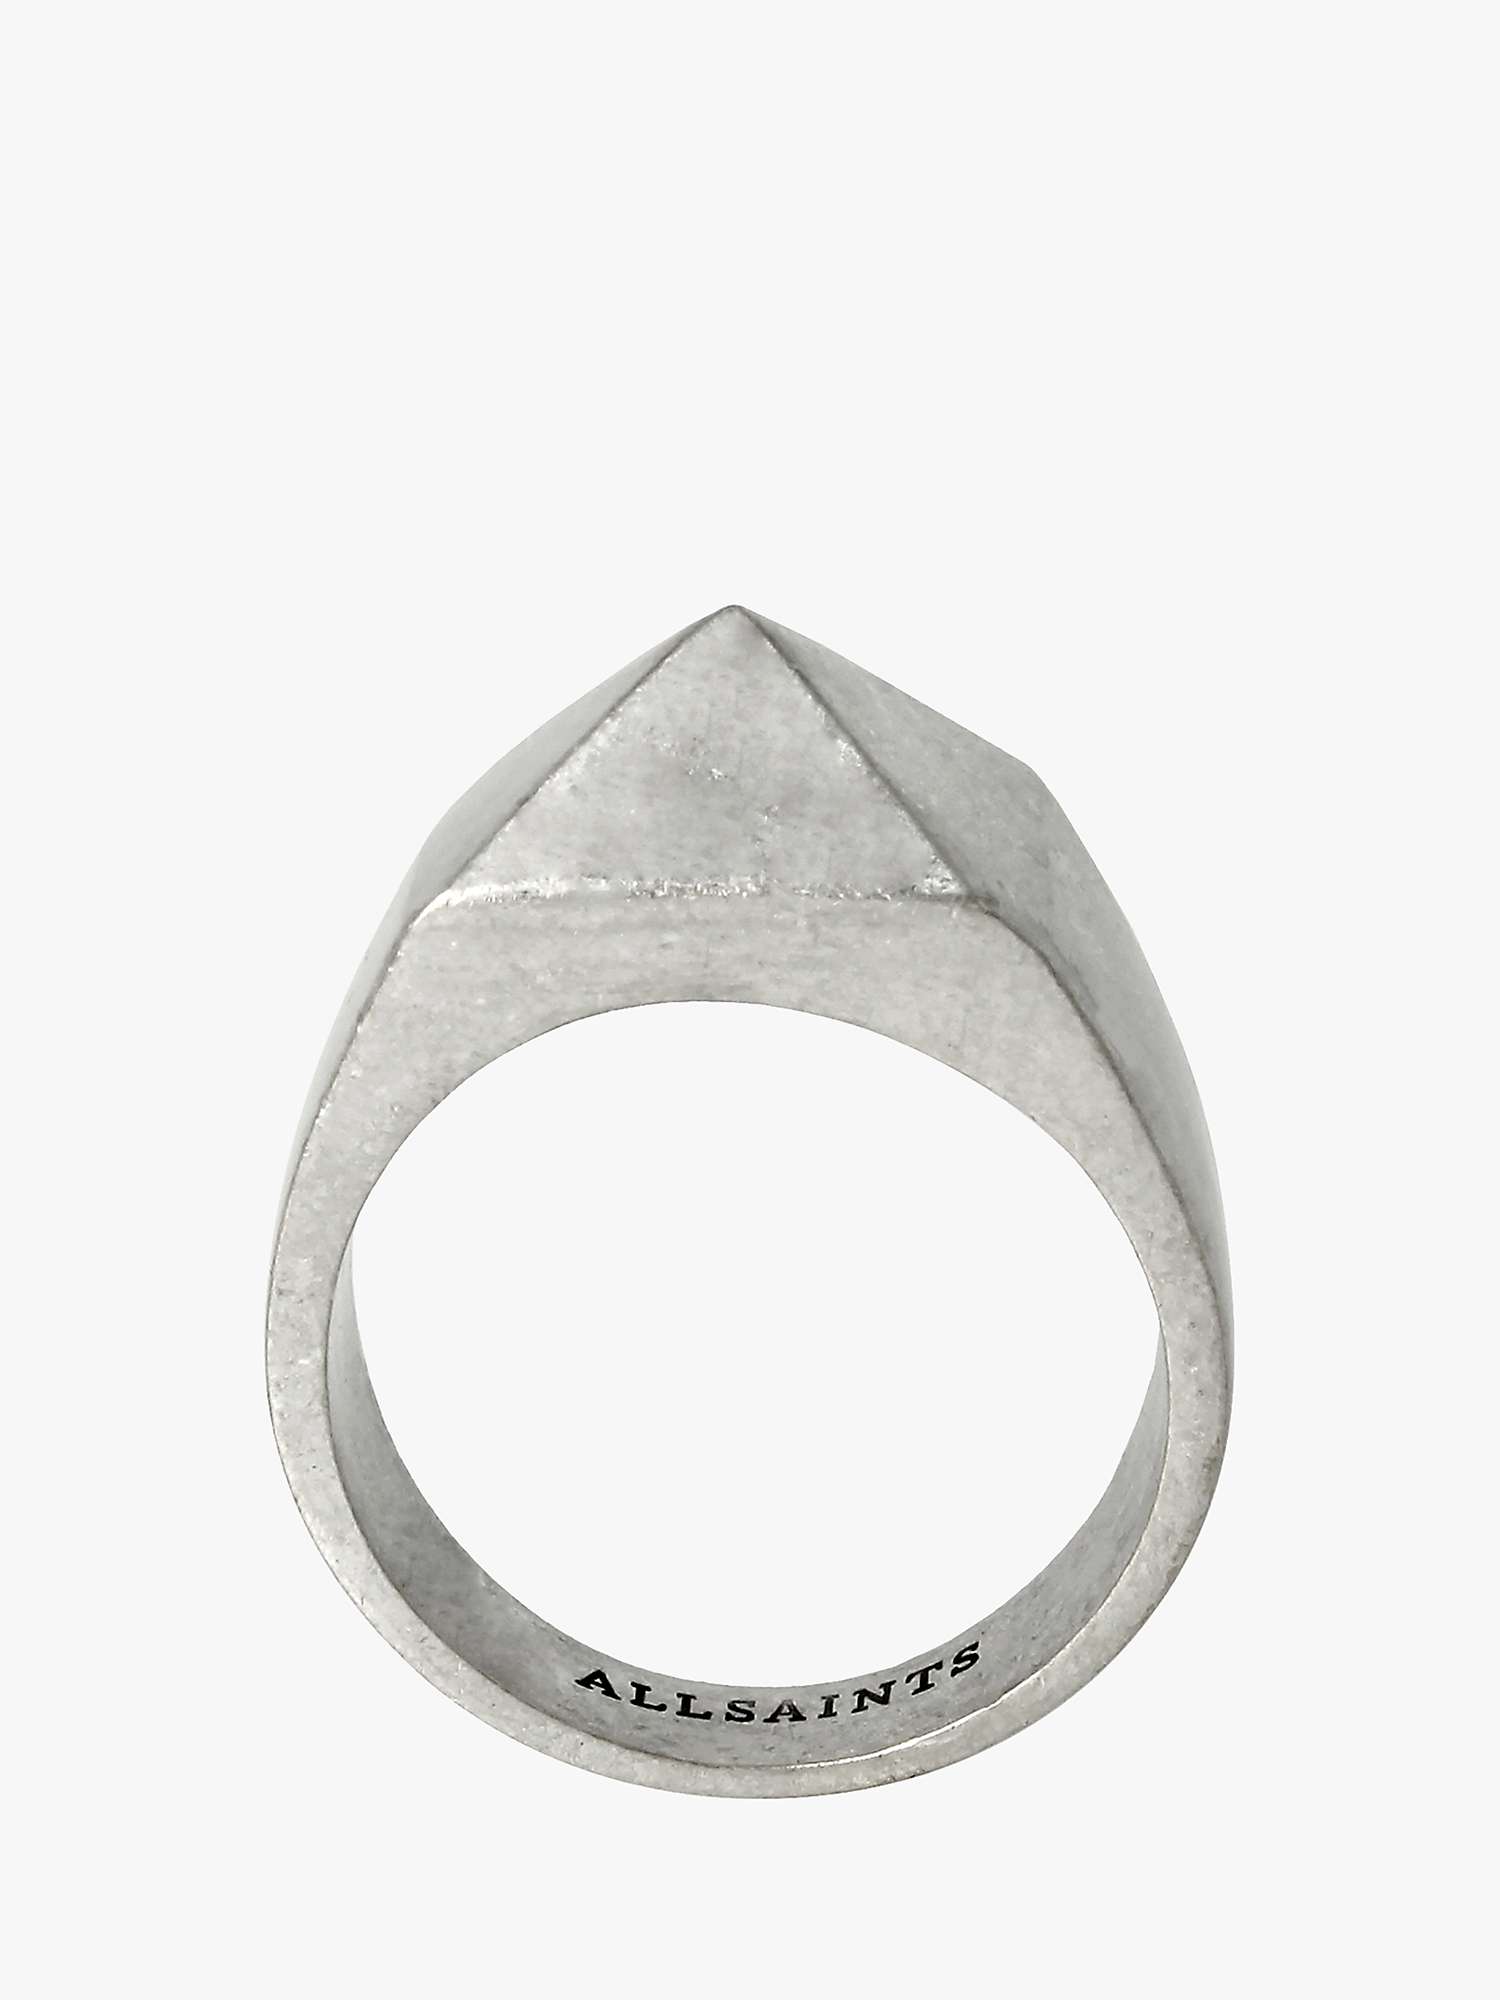 Buy AllSaints Pyramid Signet Ring, Warm Silver Online at johnlewis.com